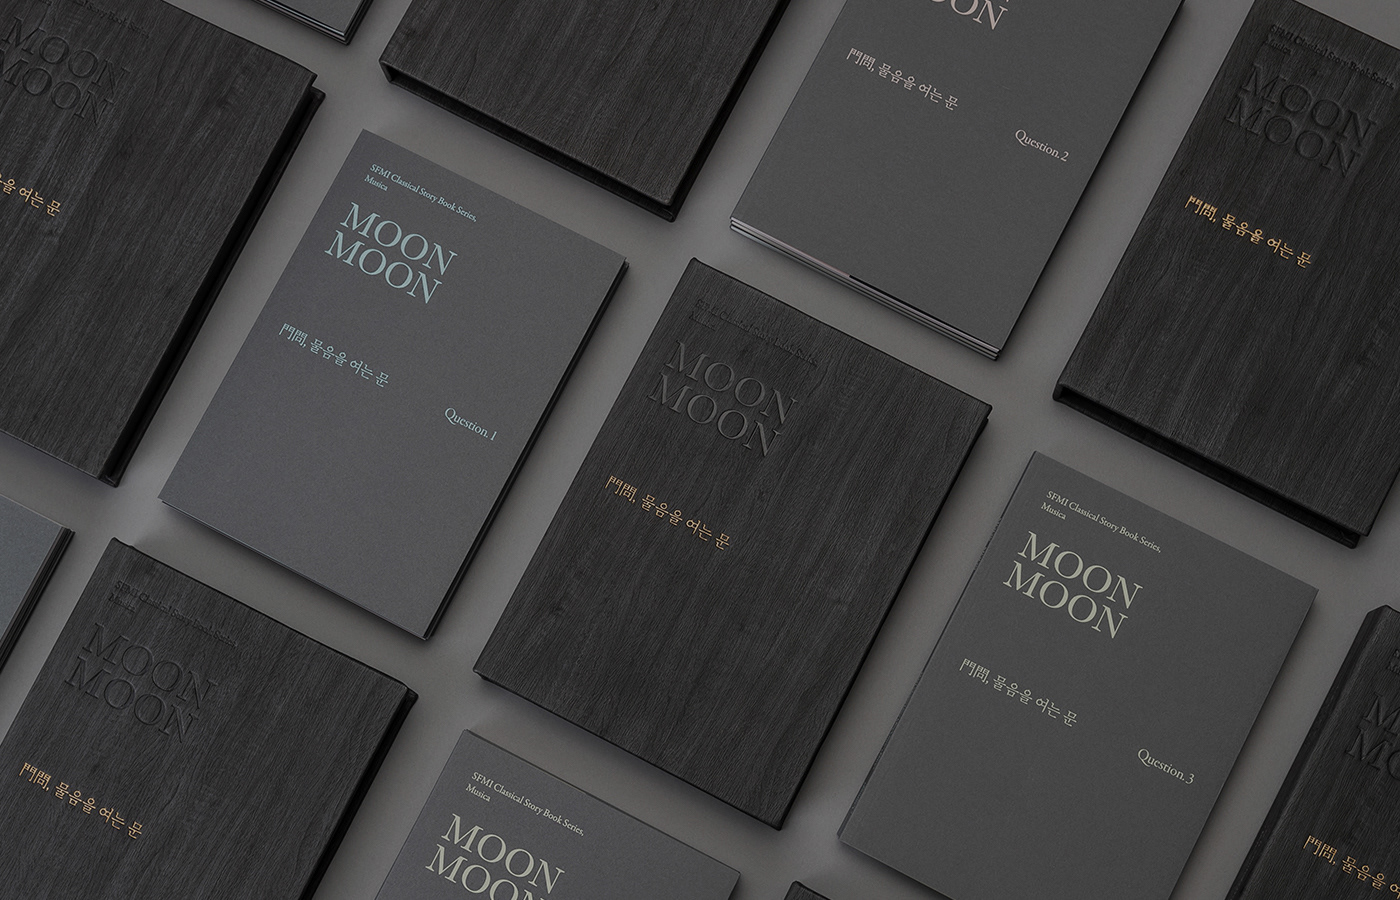 editorial design brand book Classic musica package wood texture